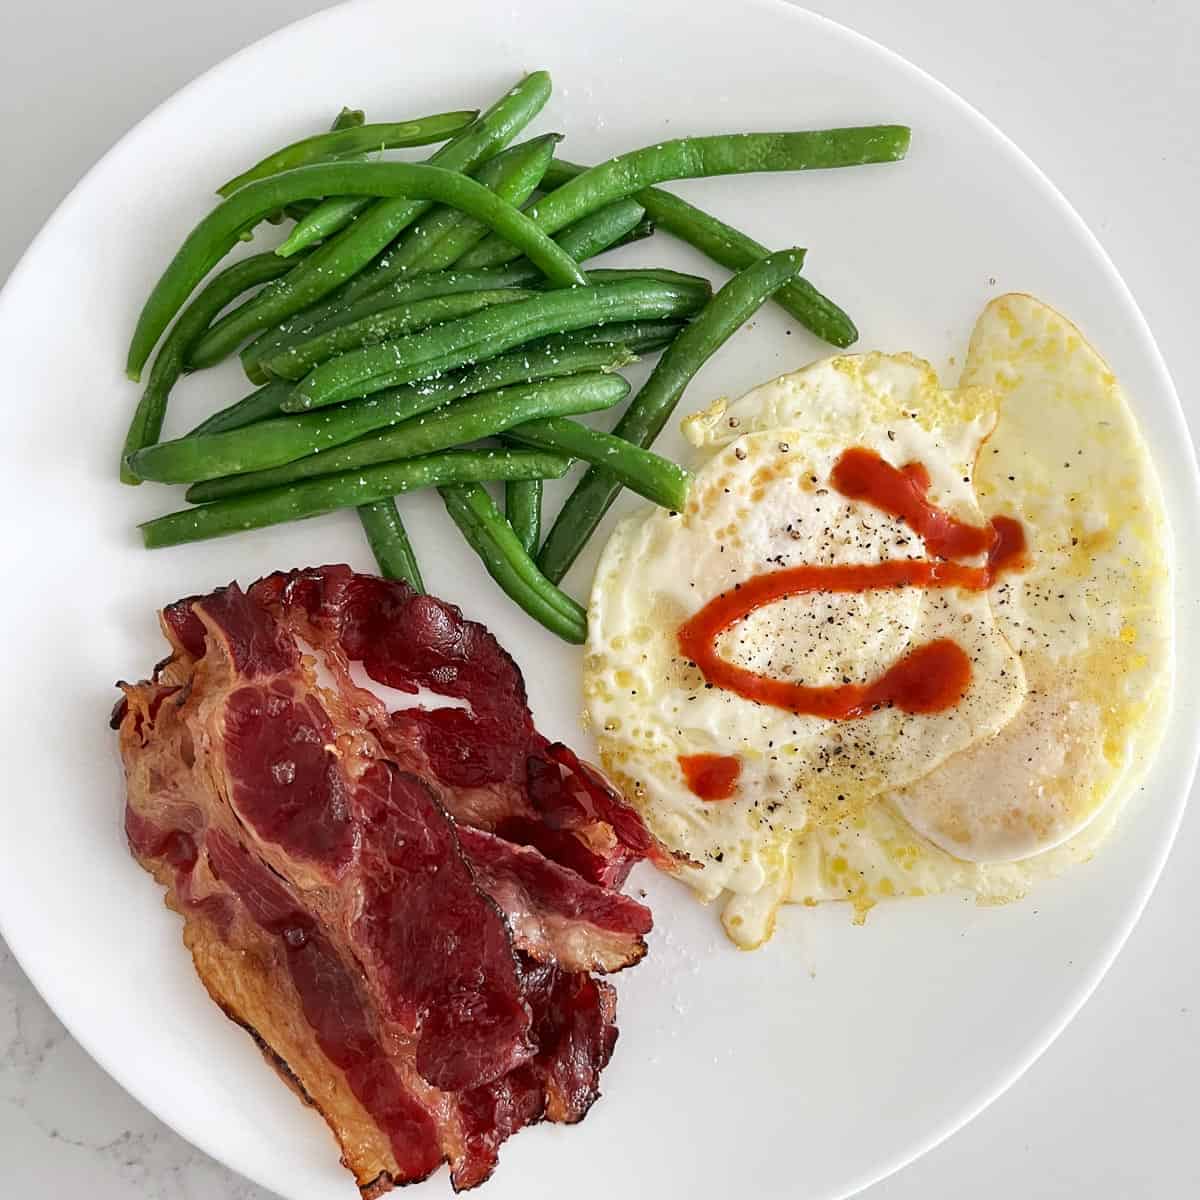 Beef bacon served with fries egg (over hard) and green beans.